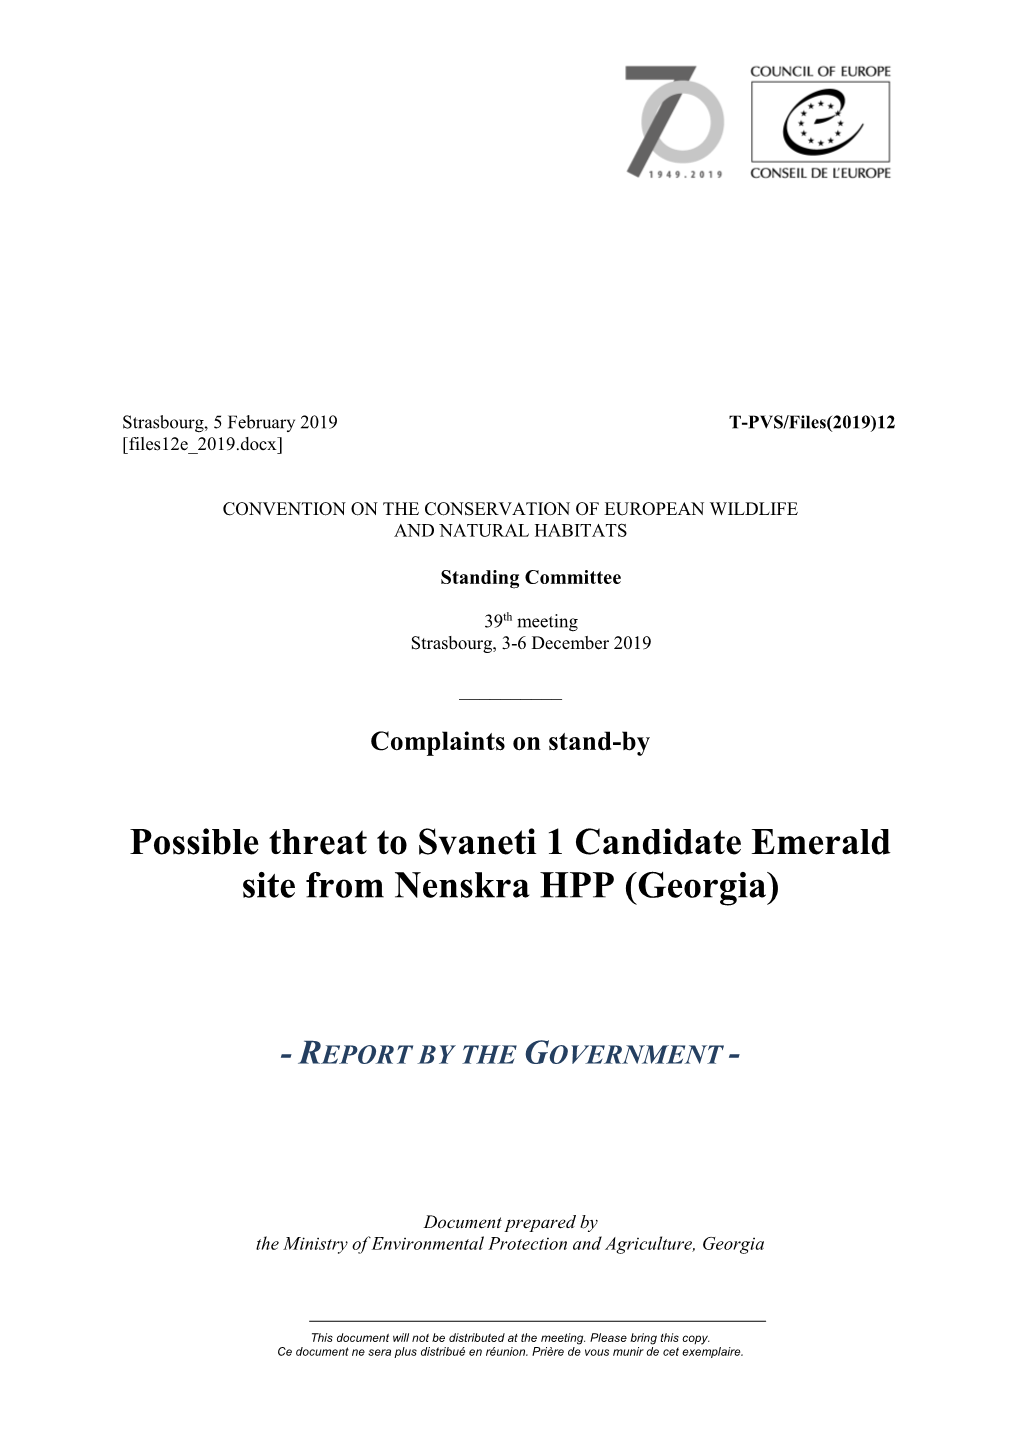 Possible Threat to Svaneti 1 Candidate Emerald Site from Nenskra HPP (Georgia)